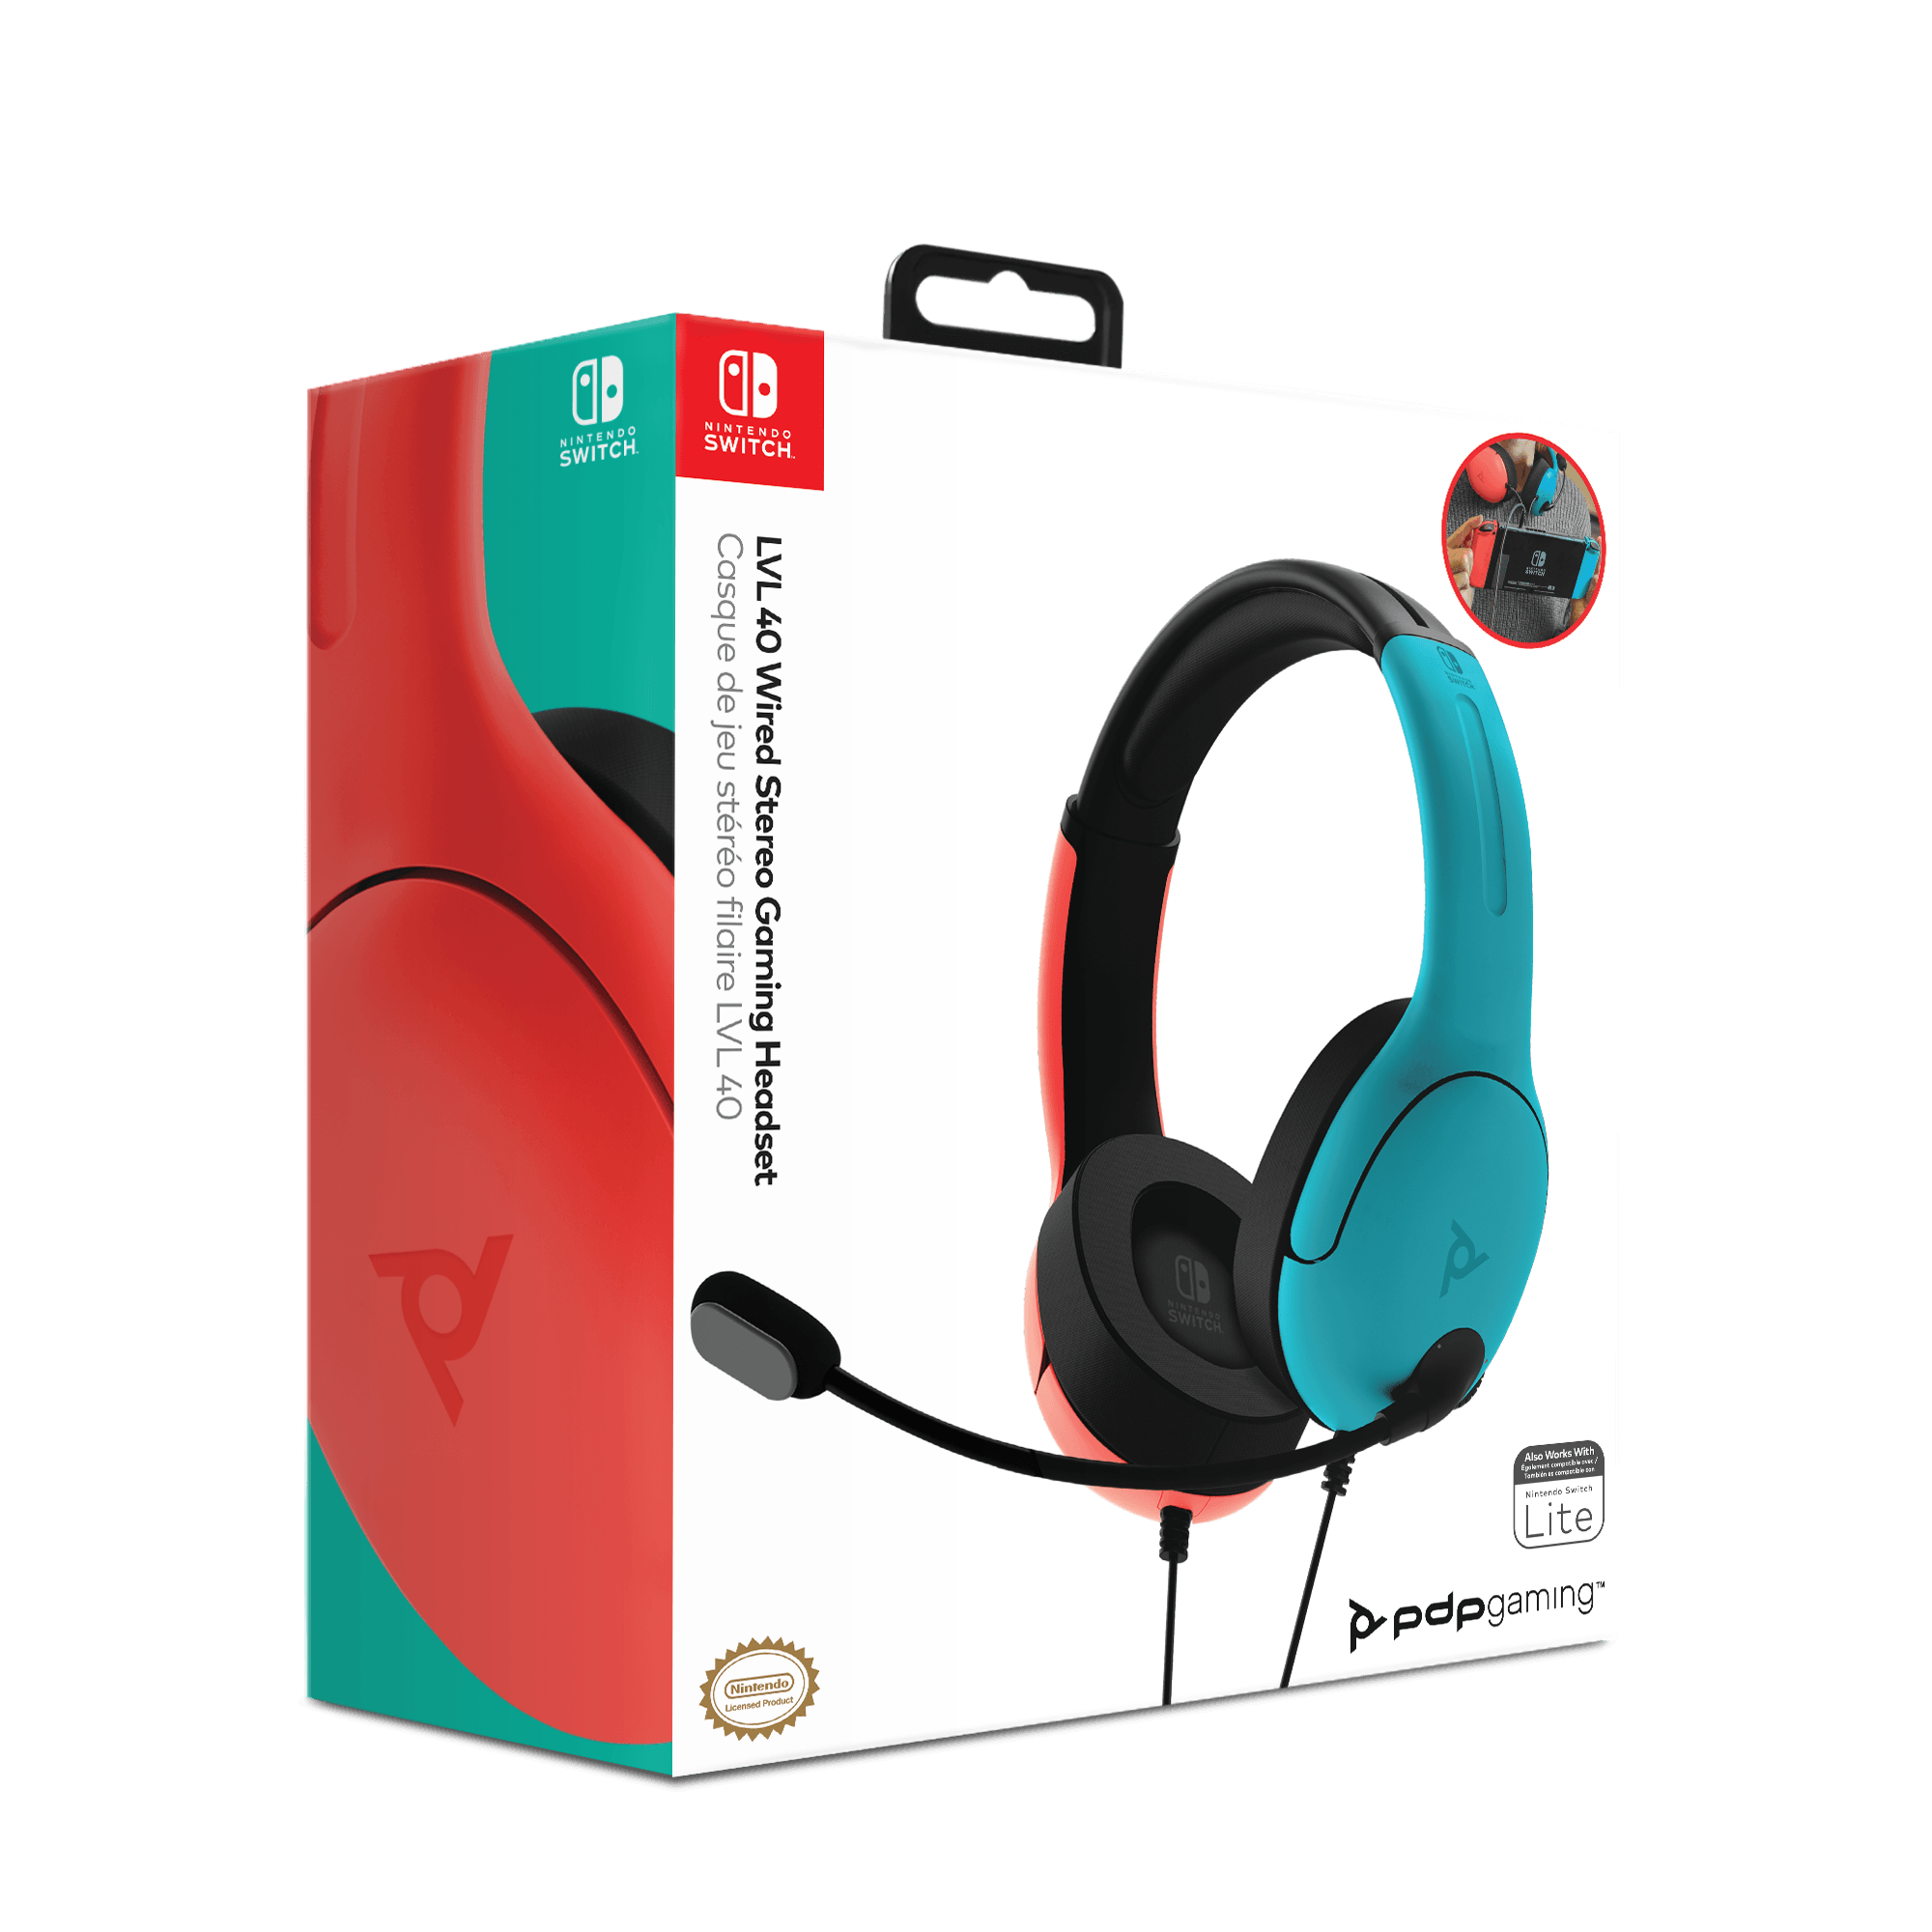 LVL40 Wired Stereo Gaming Headset for Nintendo Switch - Want a New Gadget